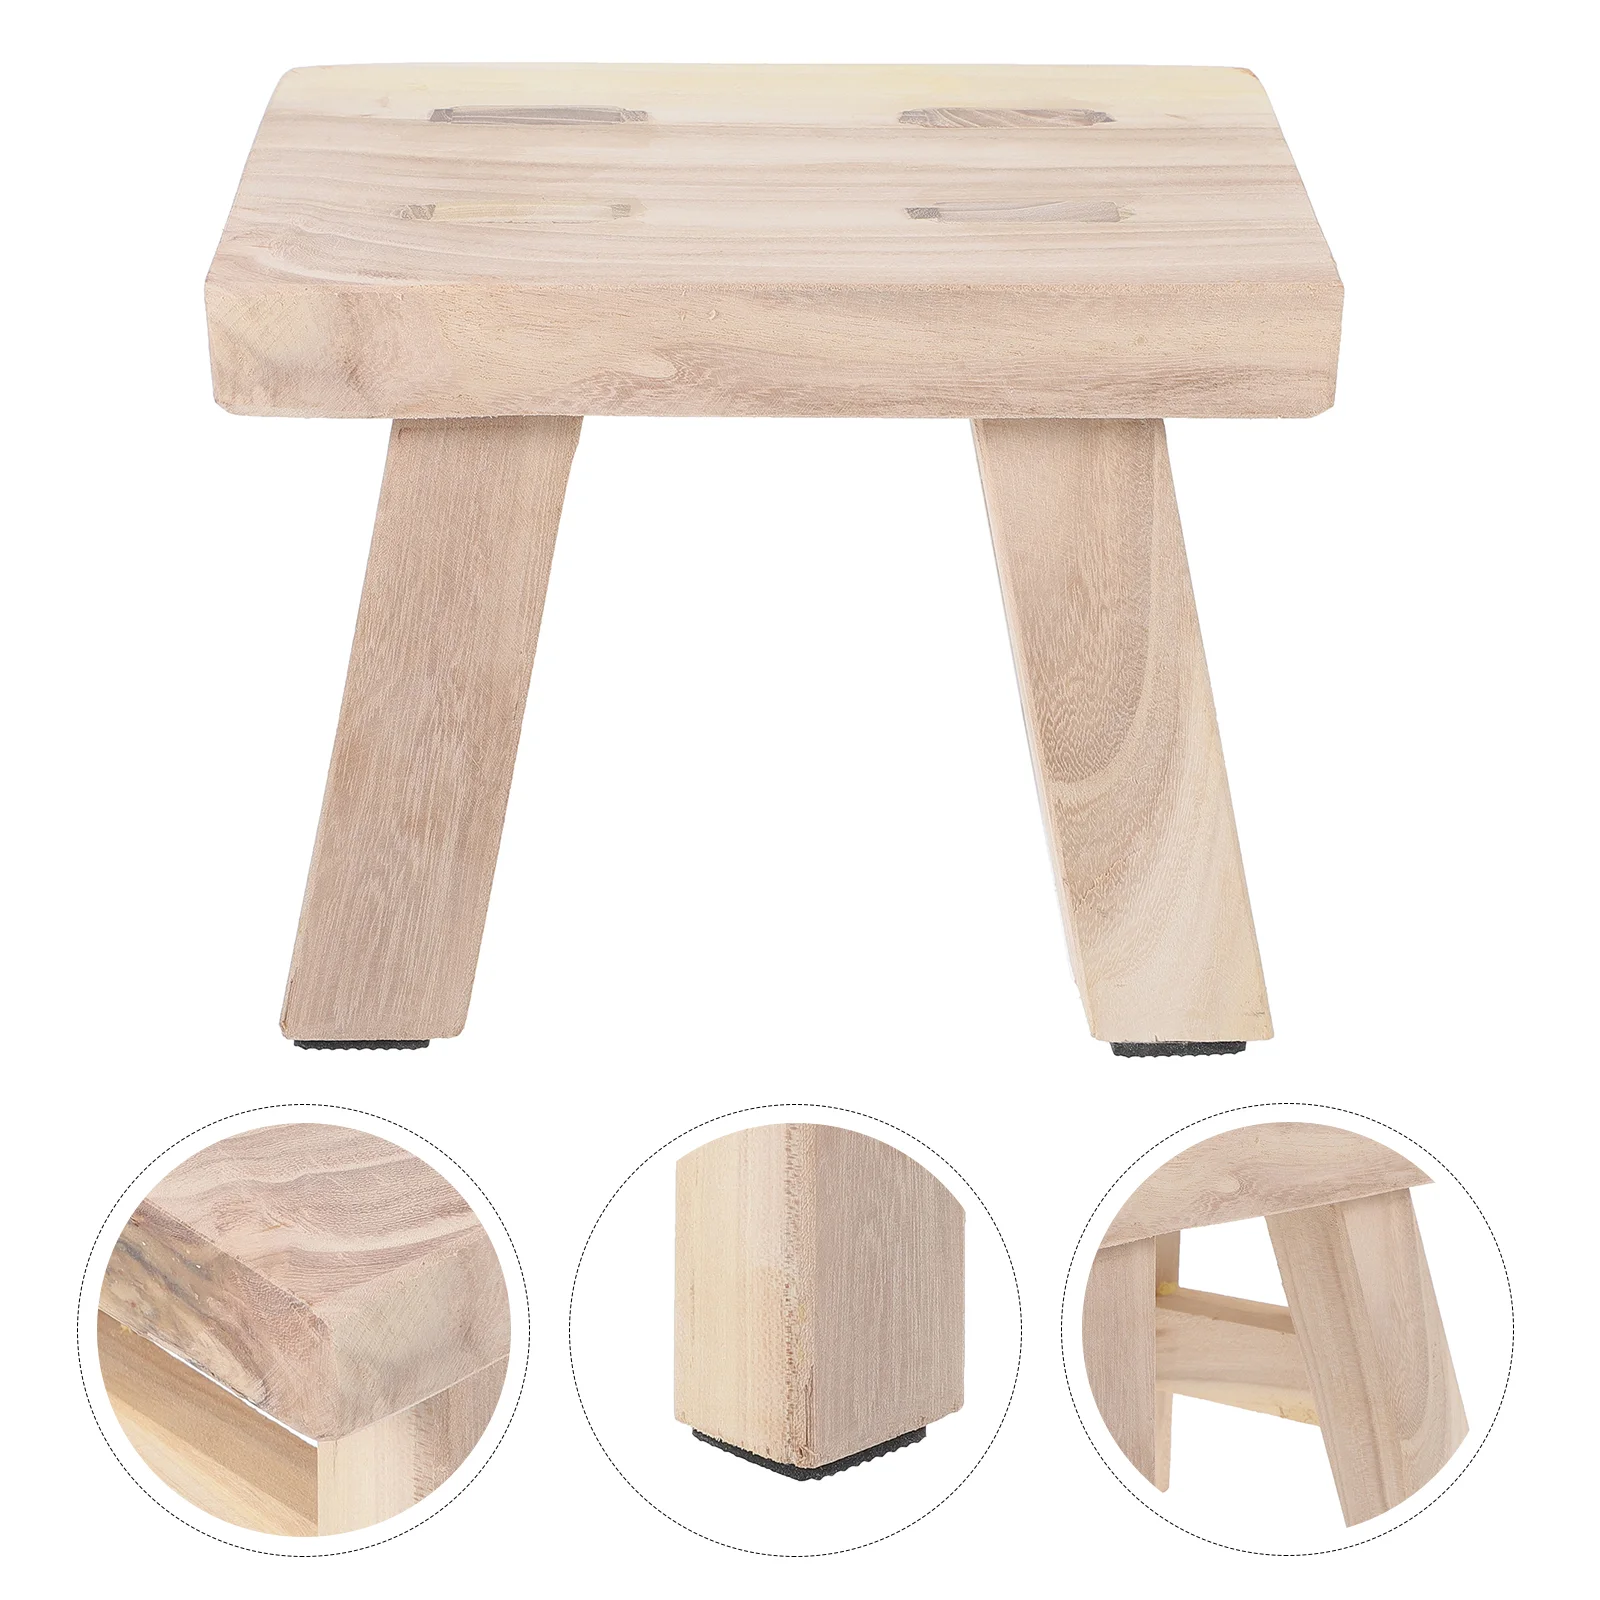 

Solid Wood Bench Small Stool Wooden Step Stools for Kids Adults Sit on Mini Toddler Child